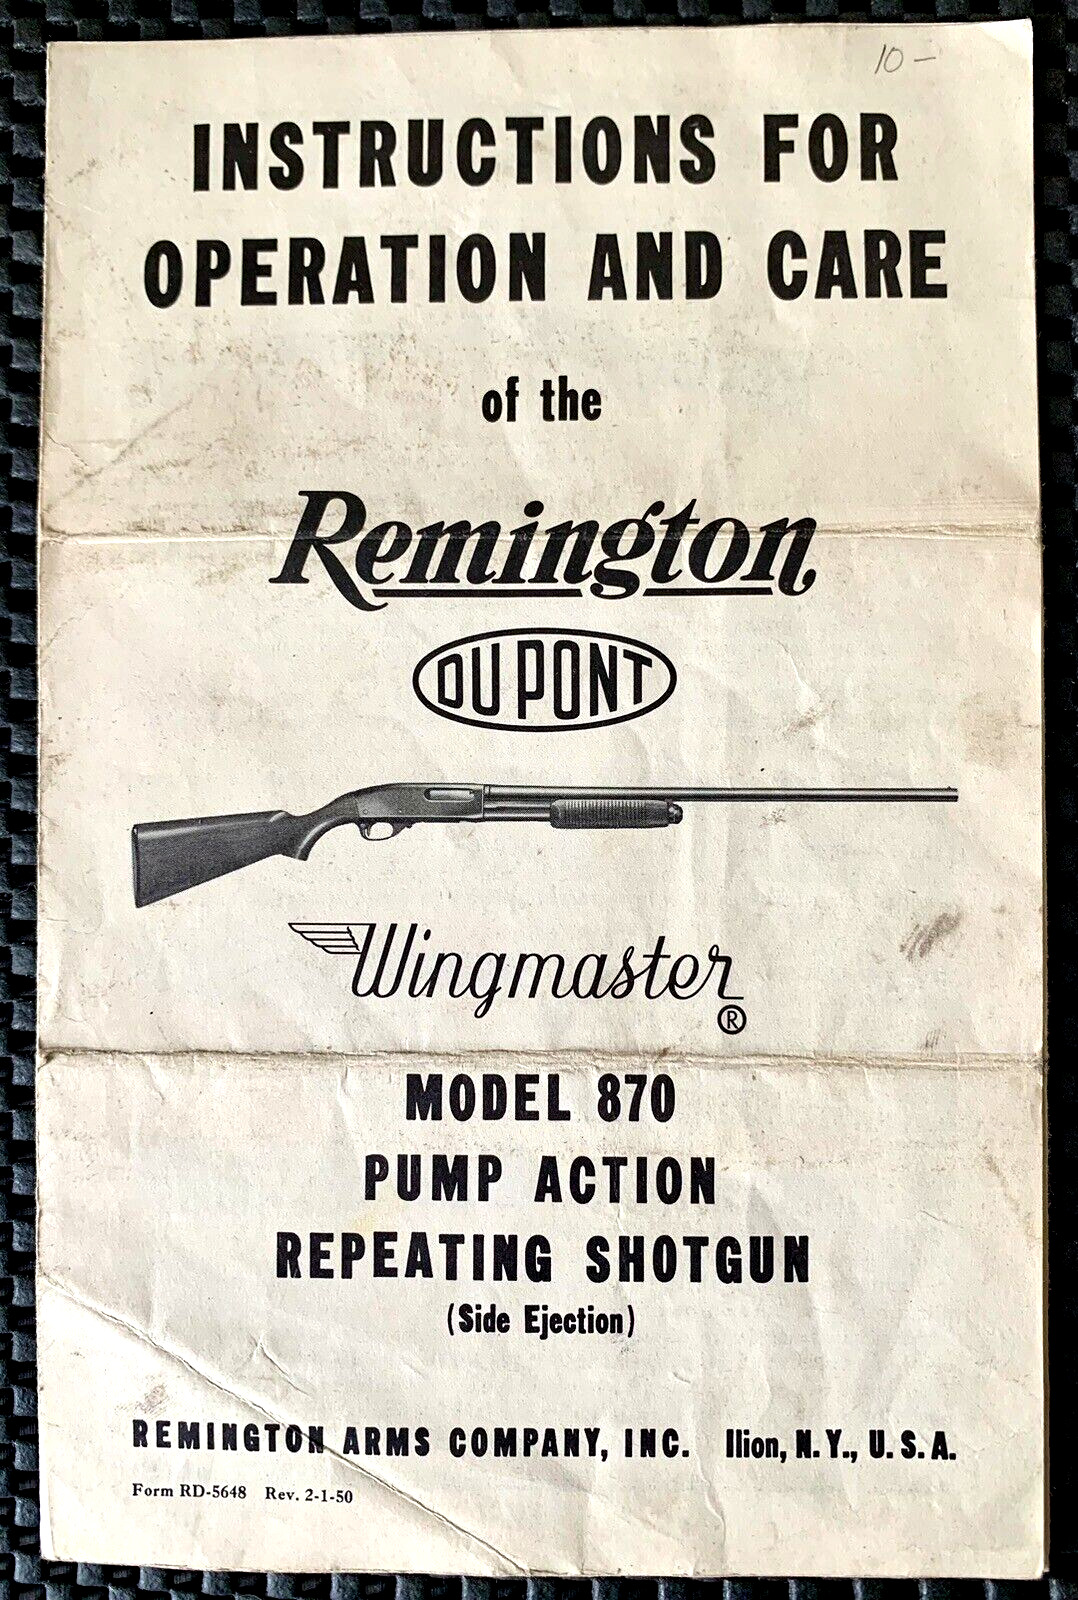 REMINGTON WINGMASTER MODEL 870 INSTRUCTIONS FOR OPERATION AND CARE BOOKLET